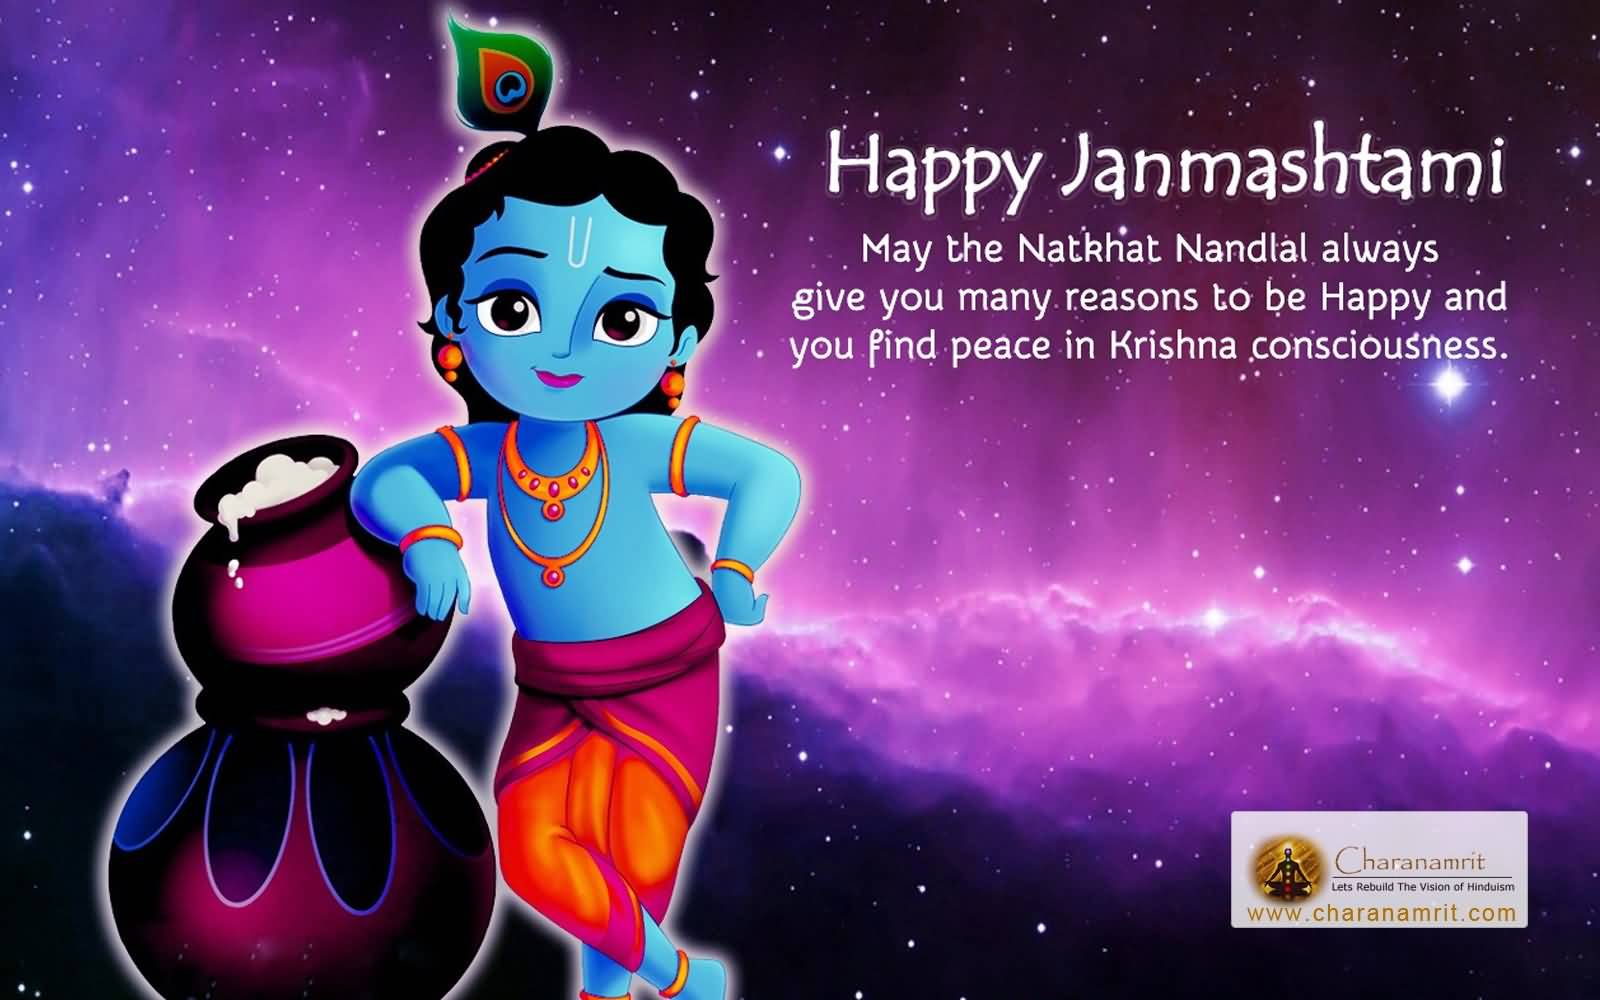 Happy Janmashtami May The Natkhat Nandlal Always Give You Many Reasons To Be Happy And You Find Peace In Krishna Consciousness